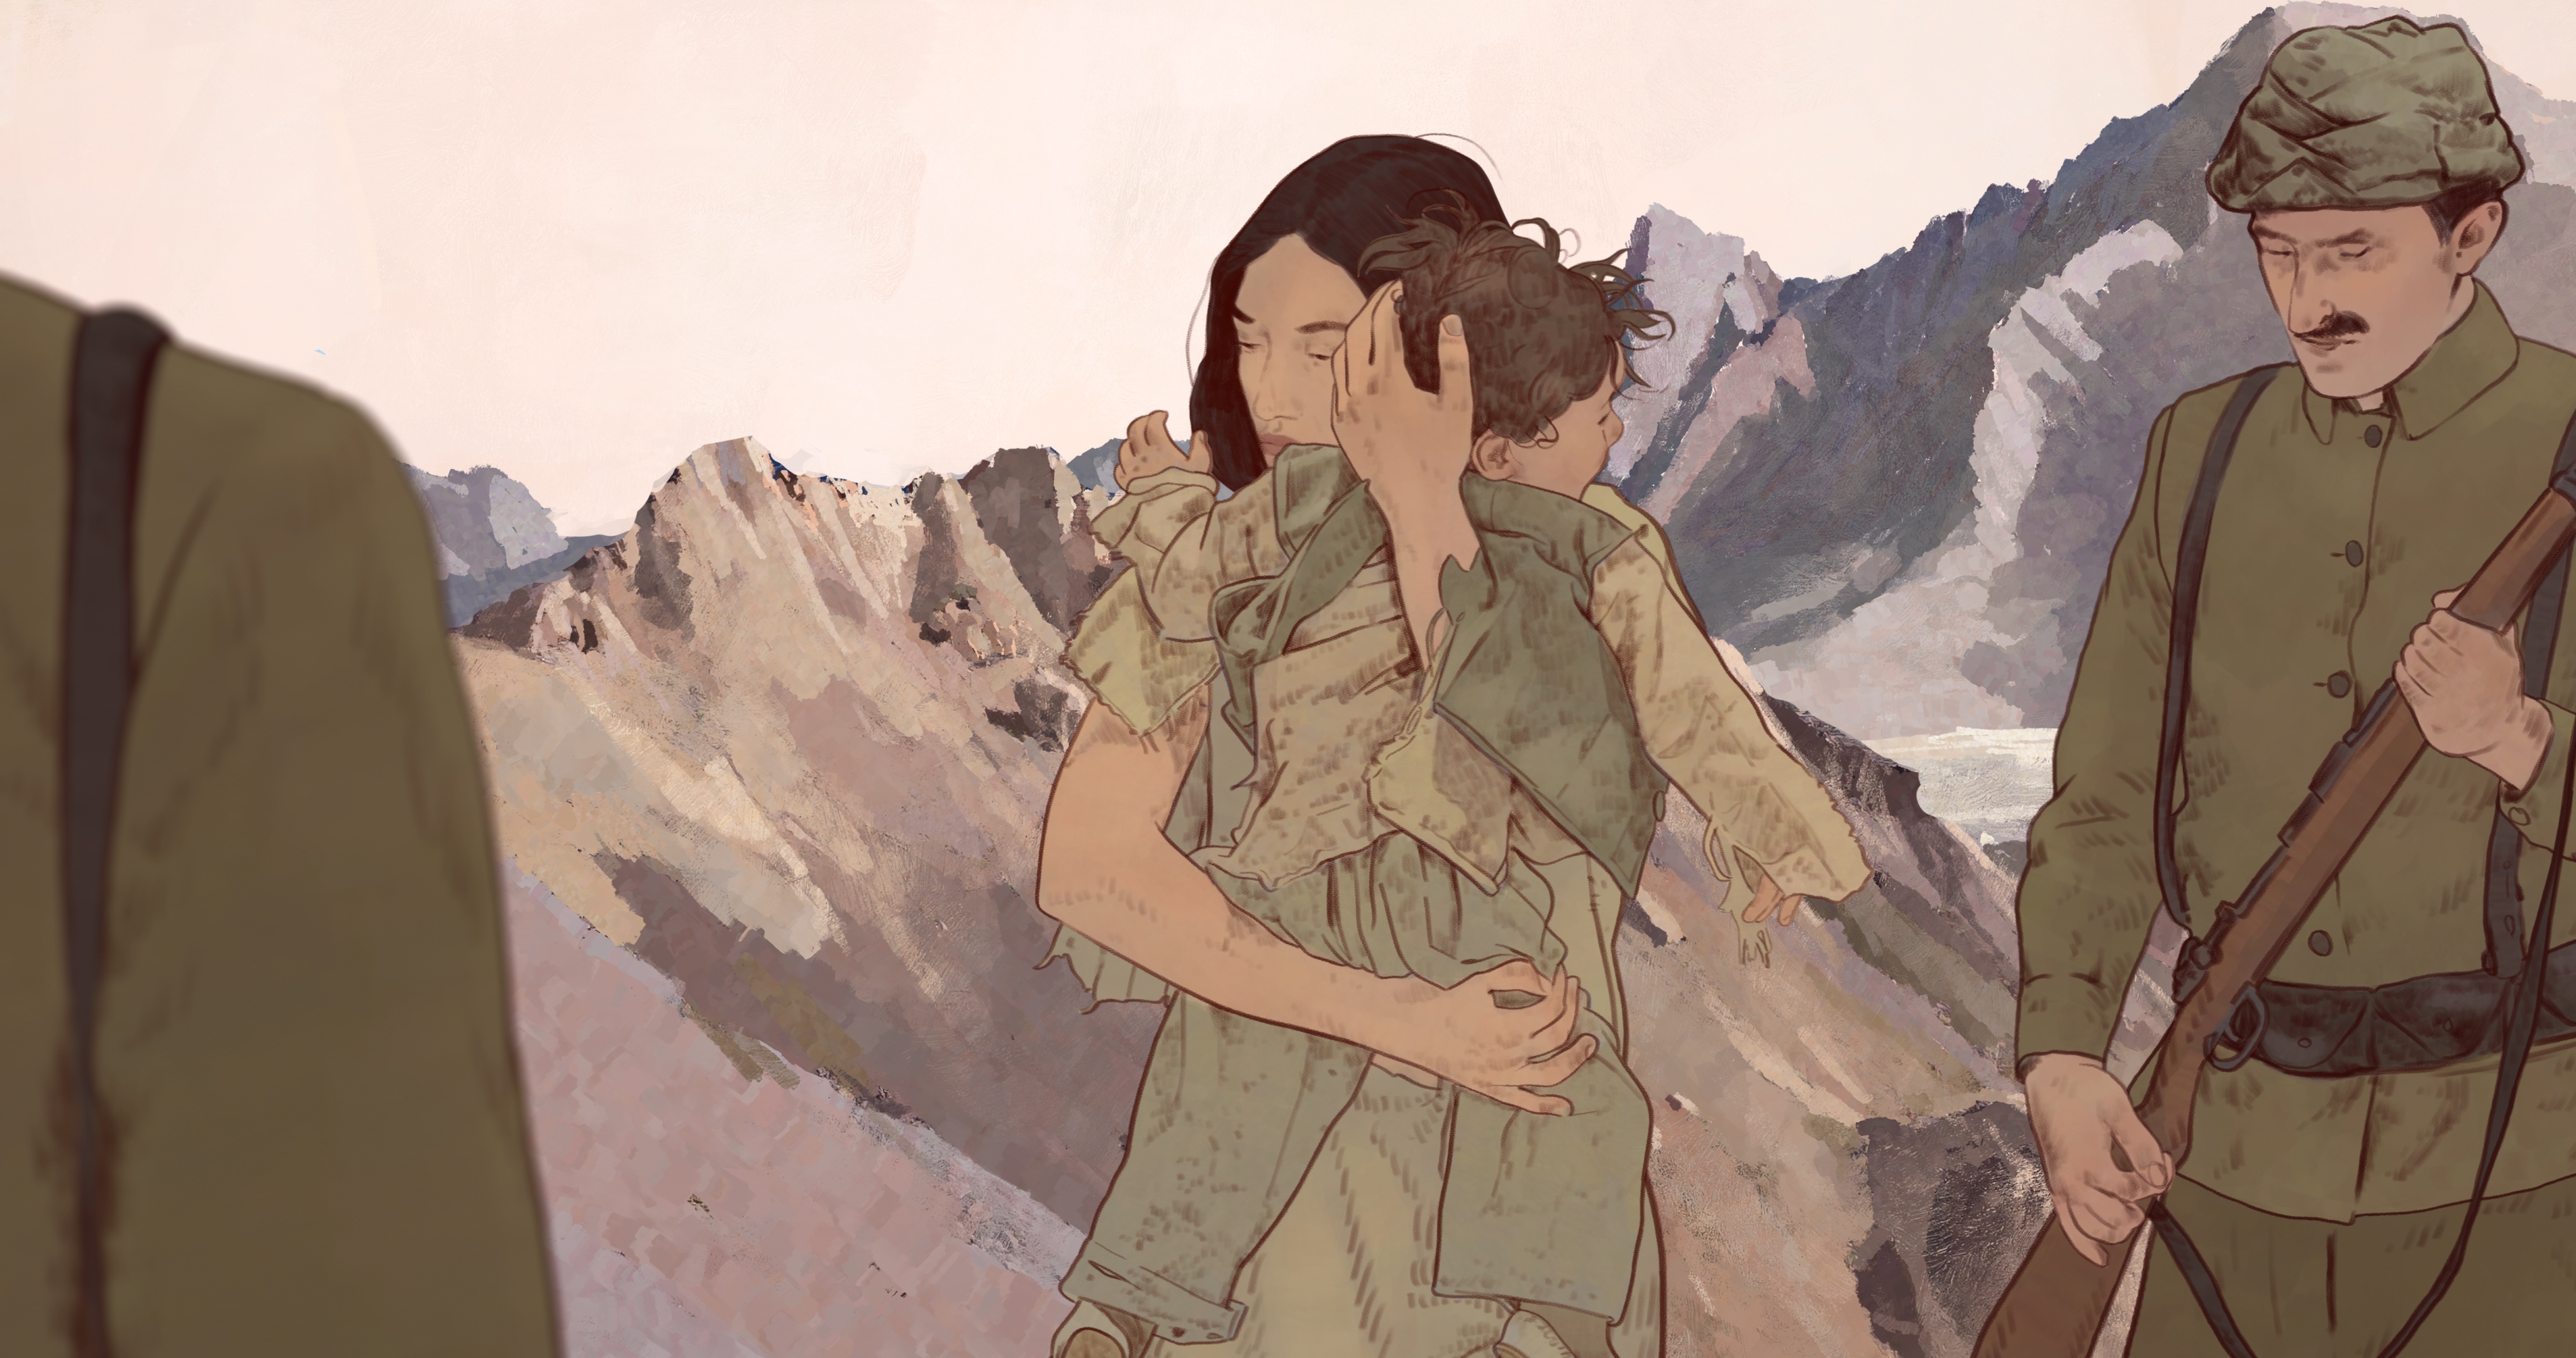 An illustration of a woman holding a child while soldiers stand nearby. From Inna Sahakyan's “Aurora’s Sunrise.” Photo courtesy of IDFA